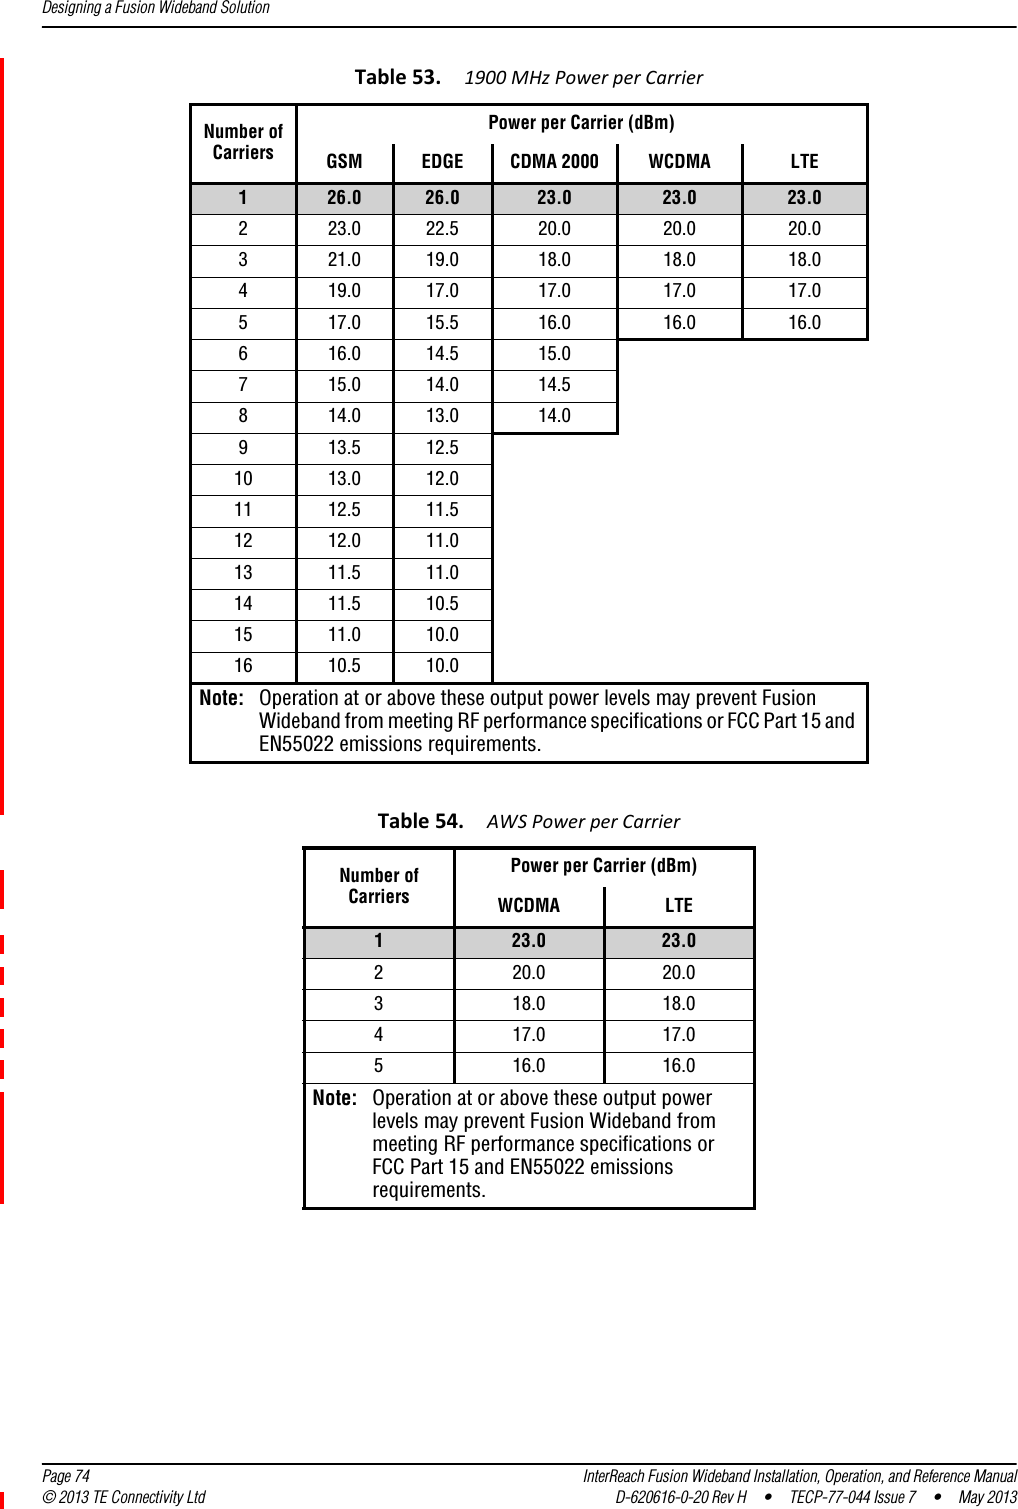 Designing a Fusion Wideband Solution  Page 74 InterReach Fusion Wideband Installation, Operation, and Reference Manual© 2013 TE Connectivity Ltd D-620616-0-20 Rev H  •  TECP-77-044 Issue 7  •  May 2013Table53.1900MHzPowerperCarrierNumber ofCarriersPower per Carrier (dBm)GSM EDGE CDMA 2000 WCDMA LTE126.0 26.0 23.0 23.0 23.0223.0 22.5 20.0 20.0 20.0321.0 19.0 18.0 18.0 18.0419.0 17.0 17.0 17.0 17.0517.0 15.5 16.0 16.0 16.0616.0 14.5 15.0715.0 14.0 14.5814.0 13.0 14.0913.5 12.510 13.0 12.011 12.5 11.512 12.0 11.013 11.5 11.014 11.5 10.515 11.0 10.016 10.5 10.0Note: Operation at or above these output power levels may prevent Fusion Wideband from meeting RF performance specifications or FCC Part 15 and EN55022 emissions requirements. Table54.AWSPowerperCarrierNumber of CarriersPower per Carrier (dBm)WCDMA LTE123.0 23.0220.0 20.0318.0 18.0417.0 17.0516.0 16.0Note: Operation at or above these output power levels may prevent Fusion Wideband from meeting RF performance specifications or FCC Part 15 and EN55022 emissions requirements. 